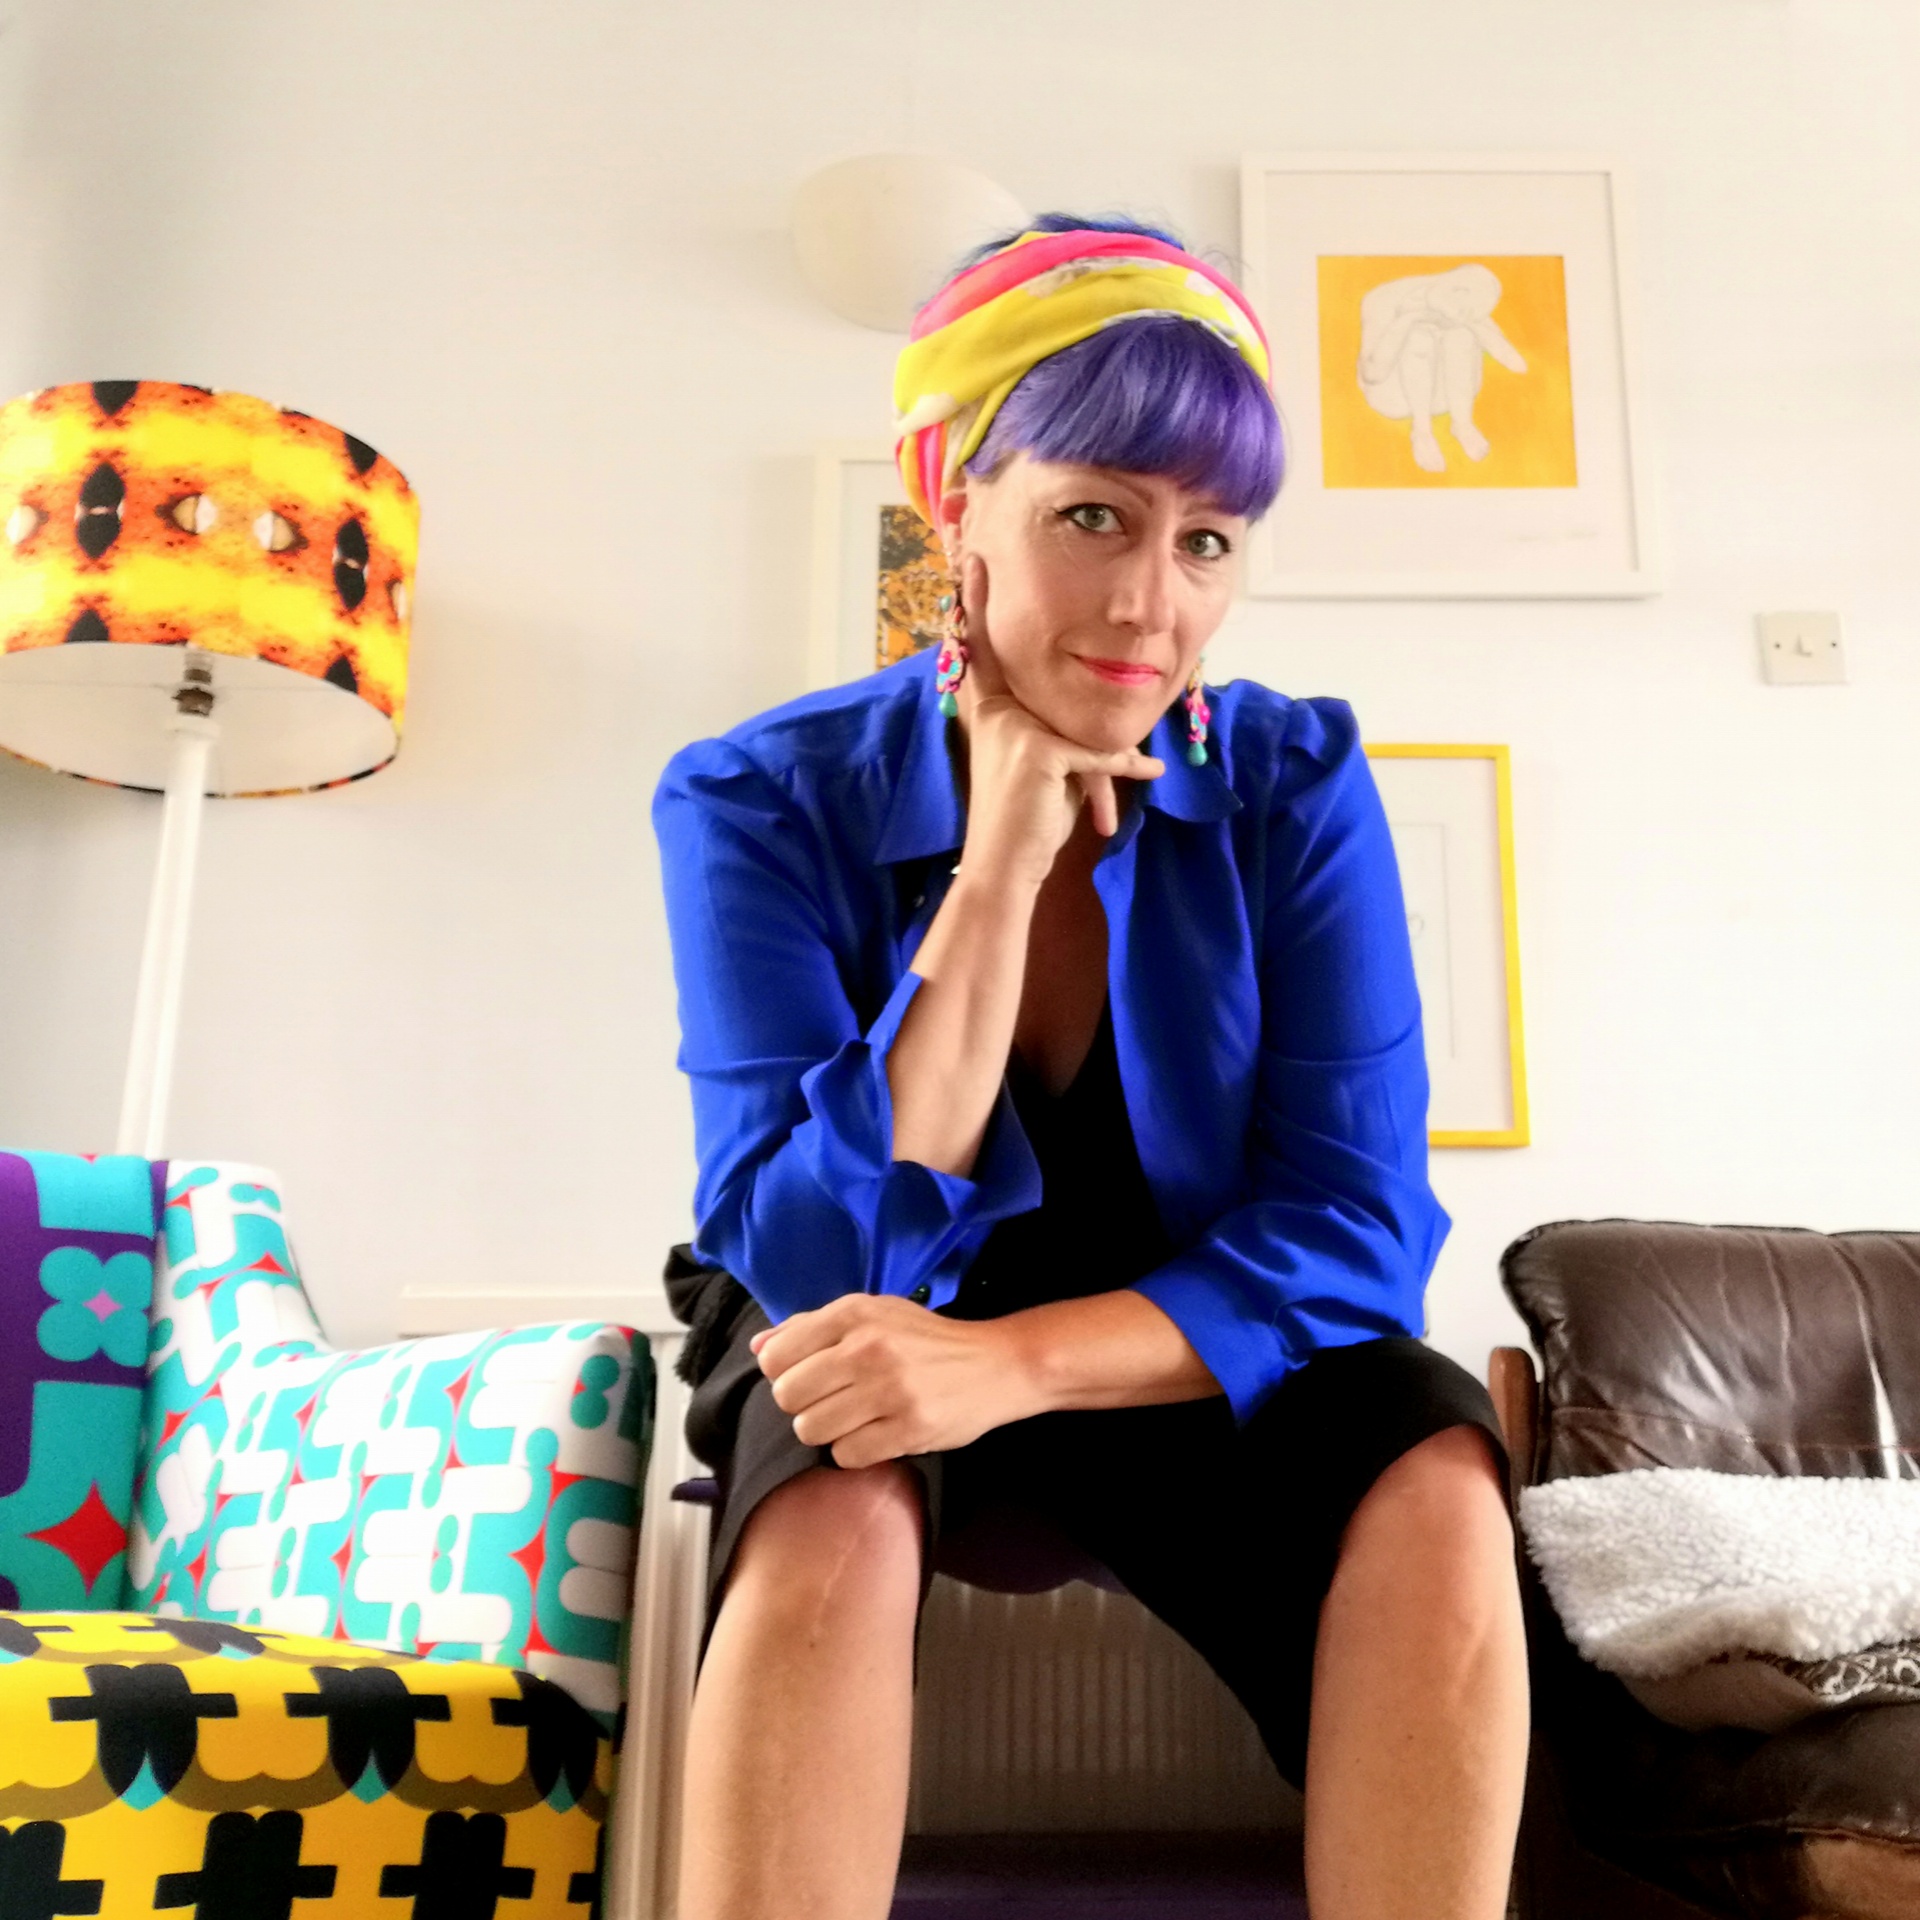 Kristina sits on a stool in a bright white room with retro accessories in orange and yellow. She wears a blue shirt, short black trousers and a scarf around her head. She rests her chin on her right hand.